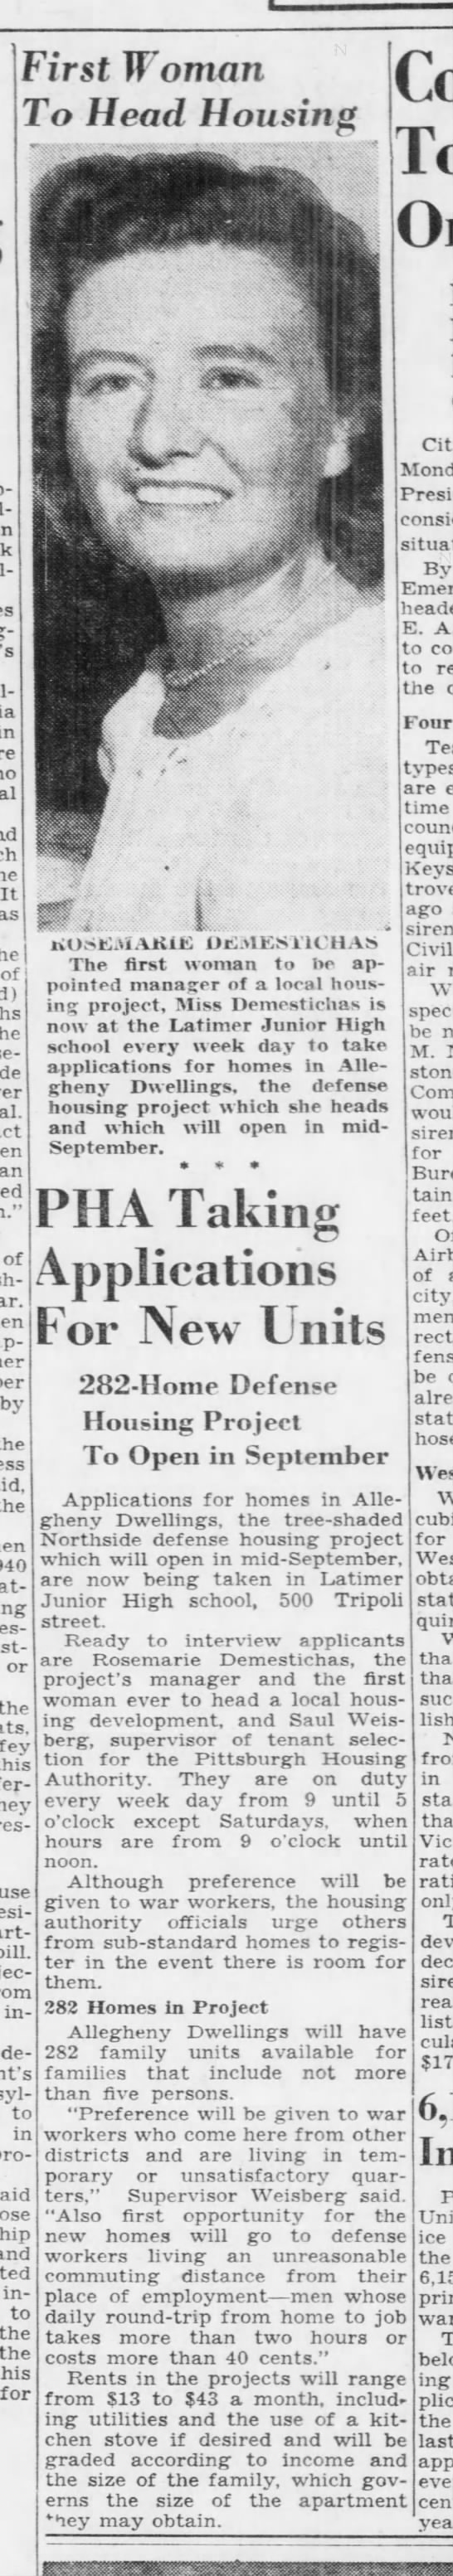 PHA Taking Applications For New Units - 